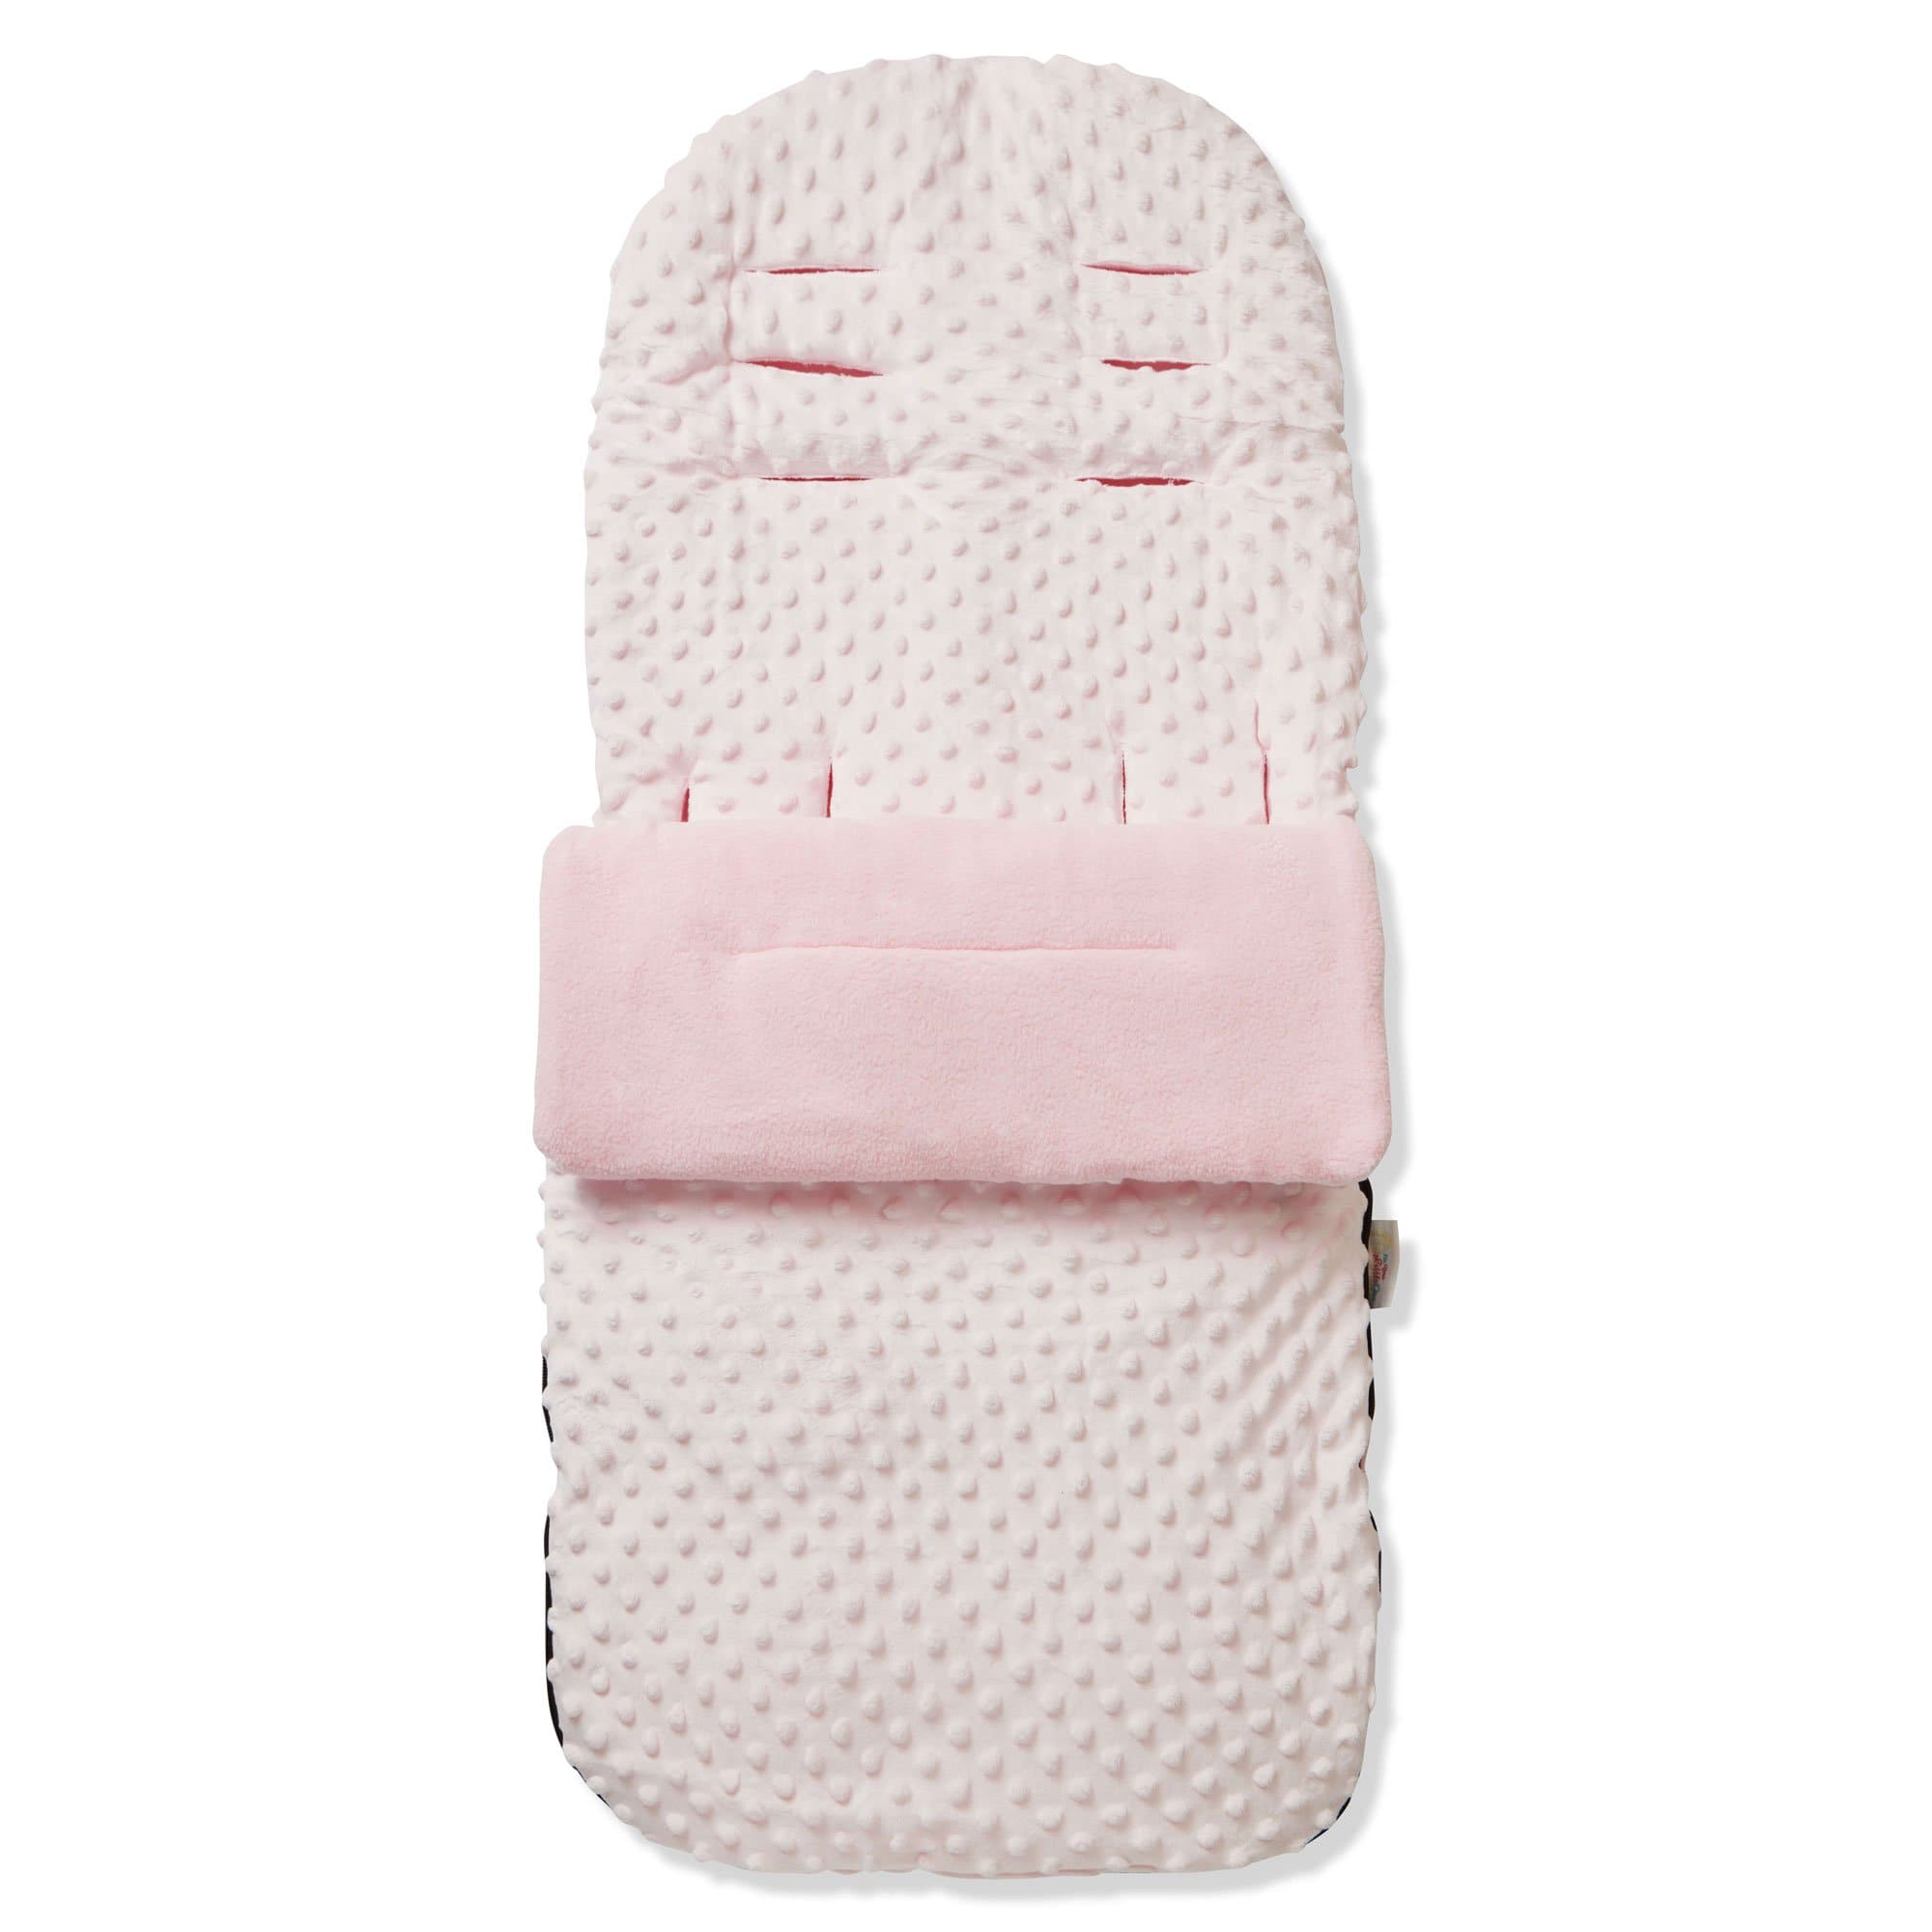 Dimple Footmuff / Cosy Toes Compatible with Quax - Pink / Fits All Models | For Your Little One